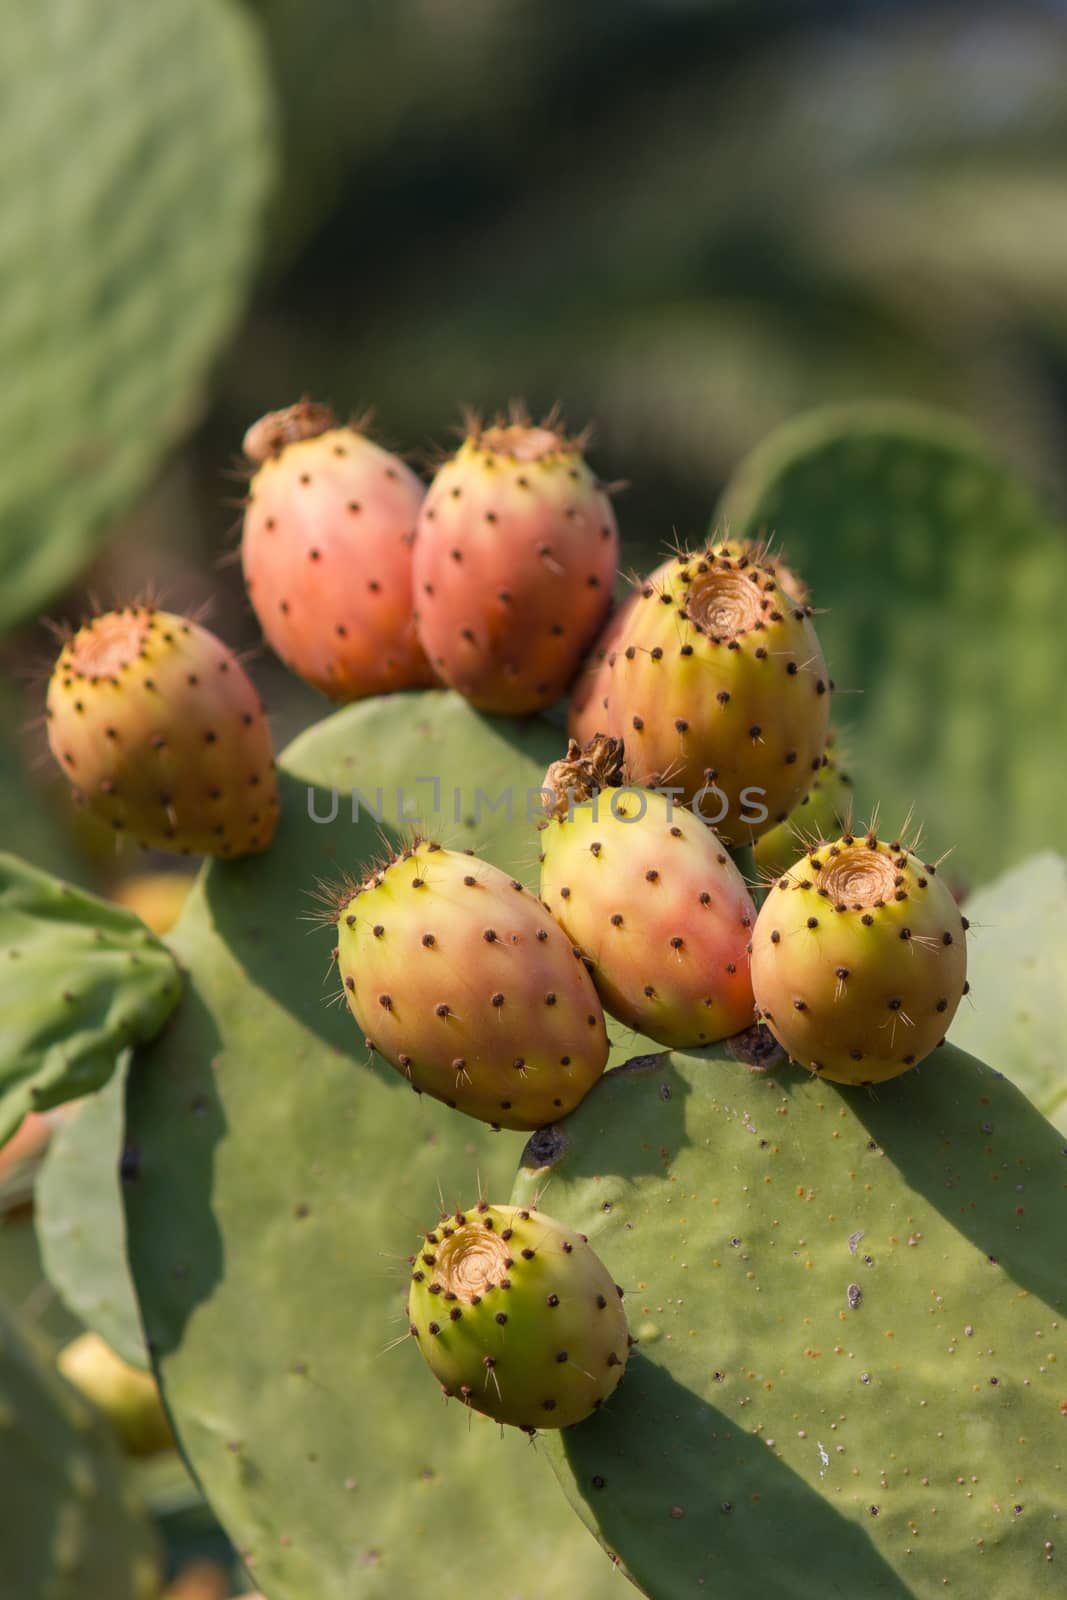 Prickly pear fruit from the peel prickly but juicy and sweet